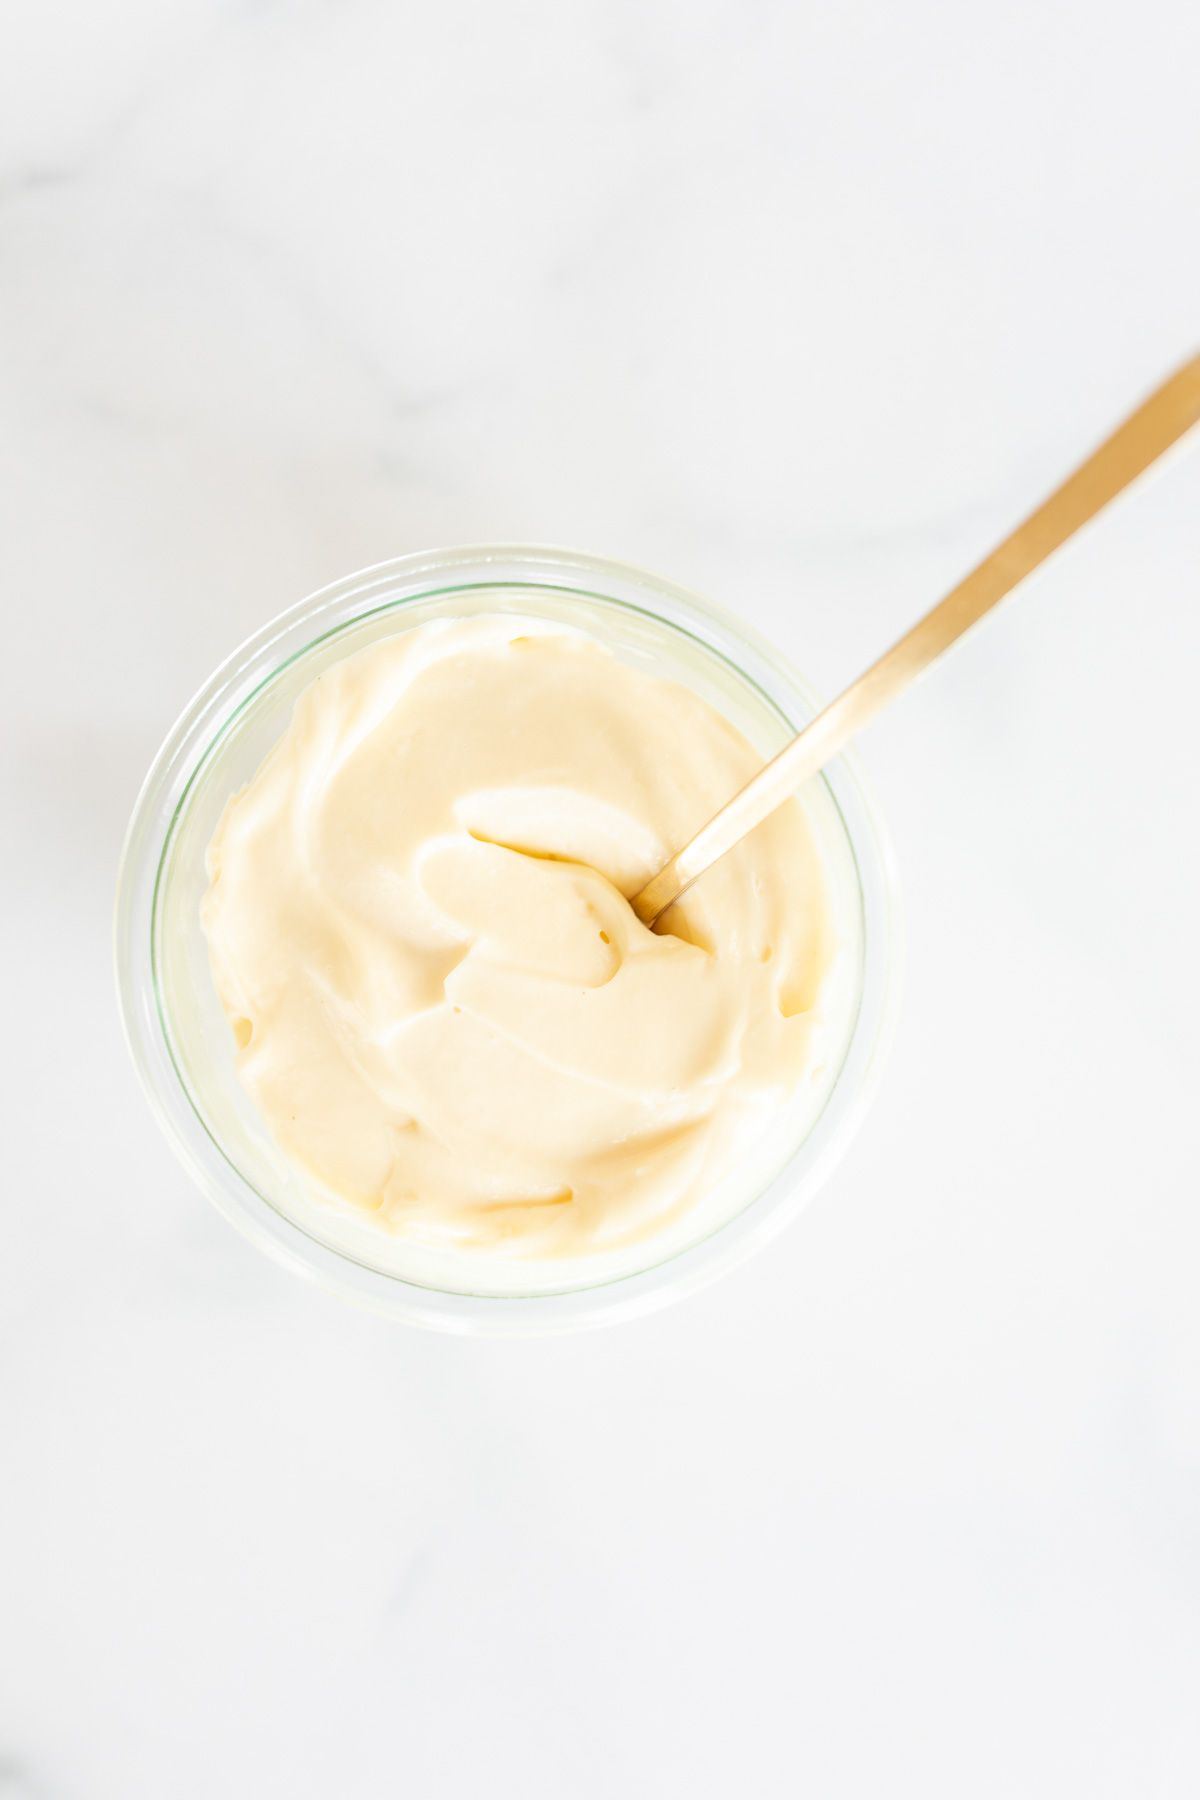 A small glass container of homemade mayonnaise with a gold spoon, resting on a marble countertop.